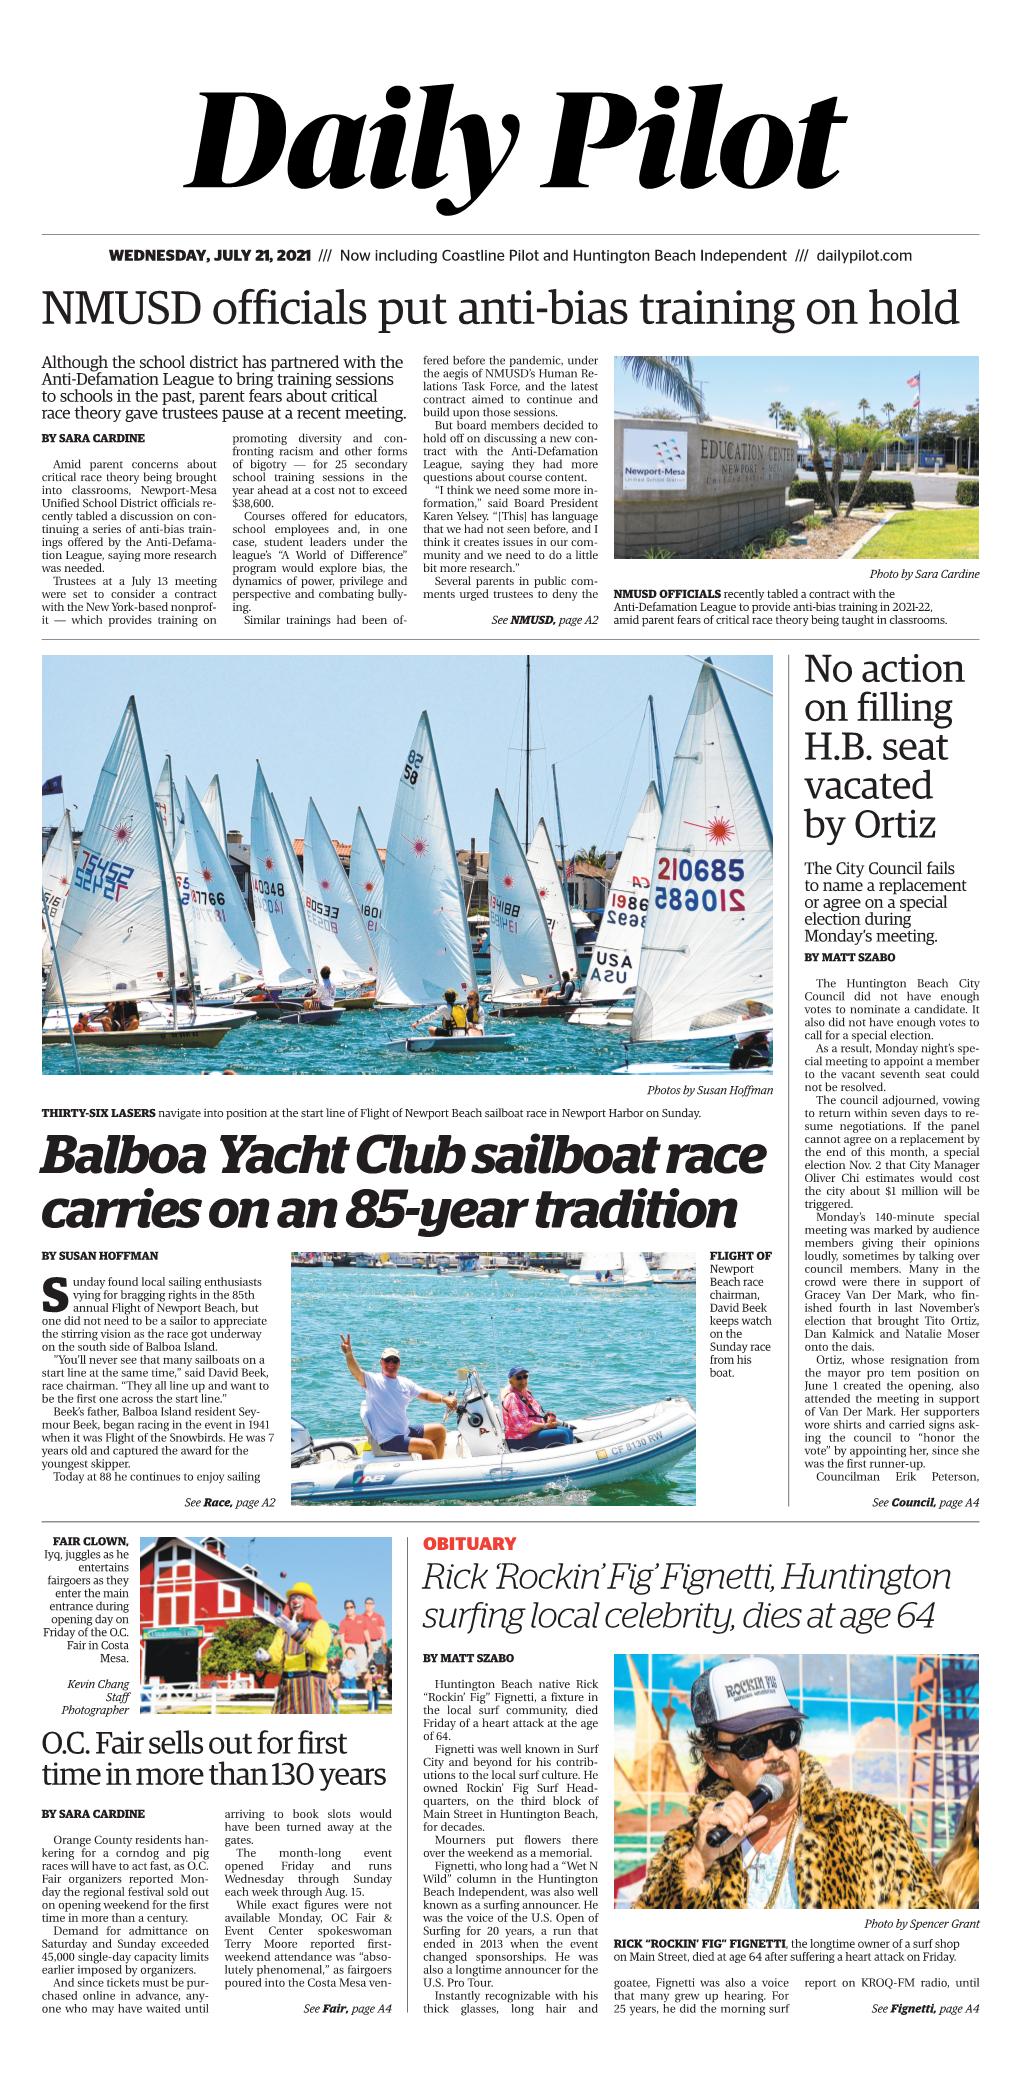 Balboa Yacht Club Sailboat Race Carries on an 85-Year Tradition